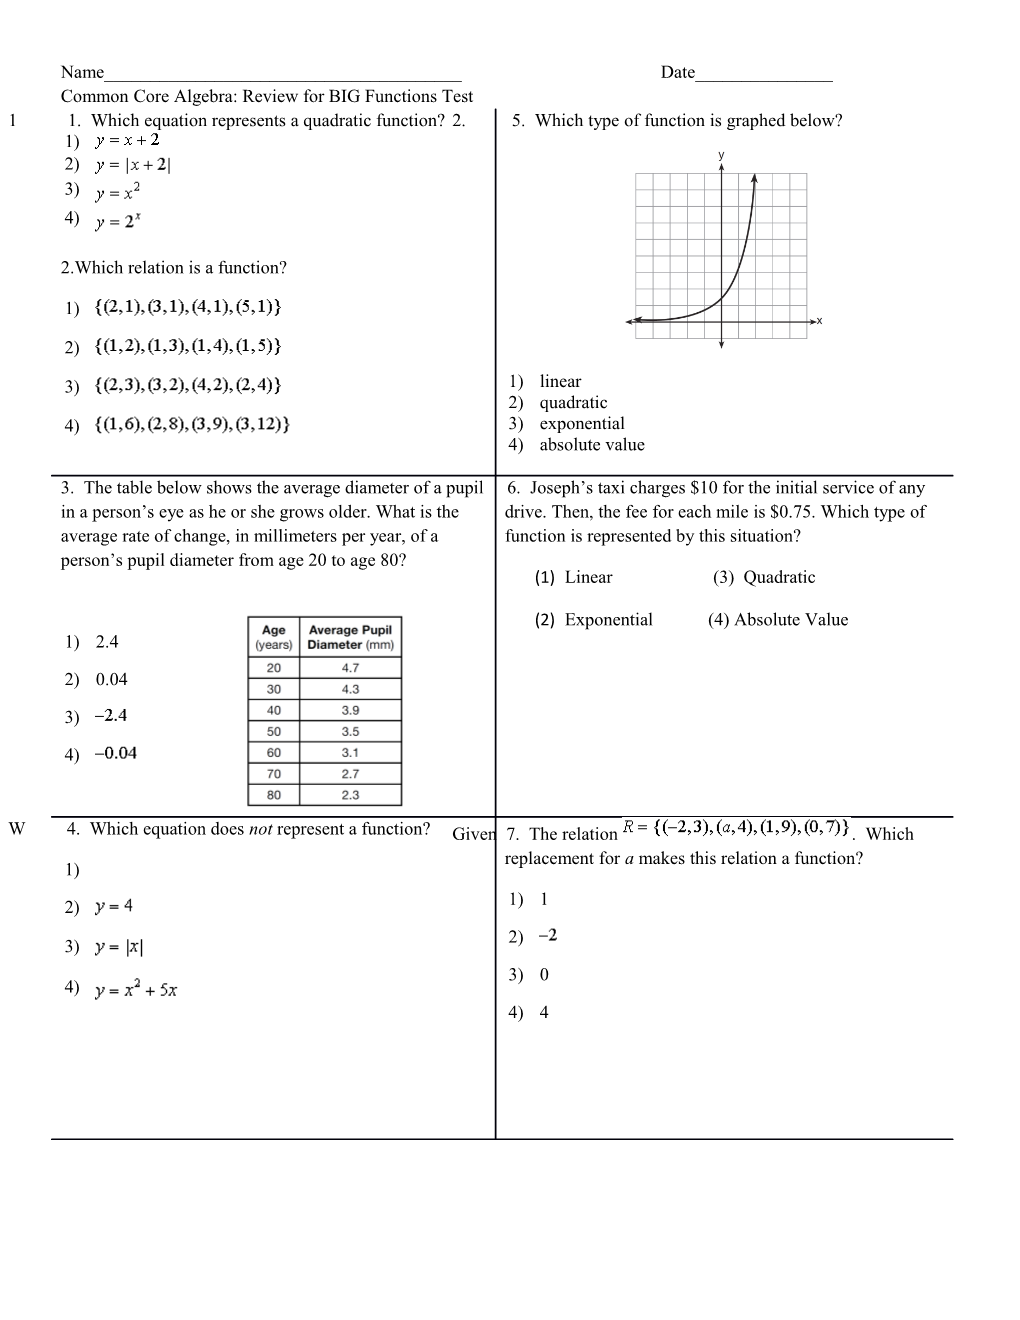 Common Core Algebra: Review for BIG Functions Test